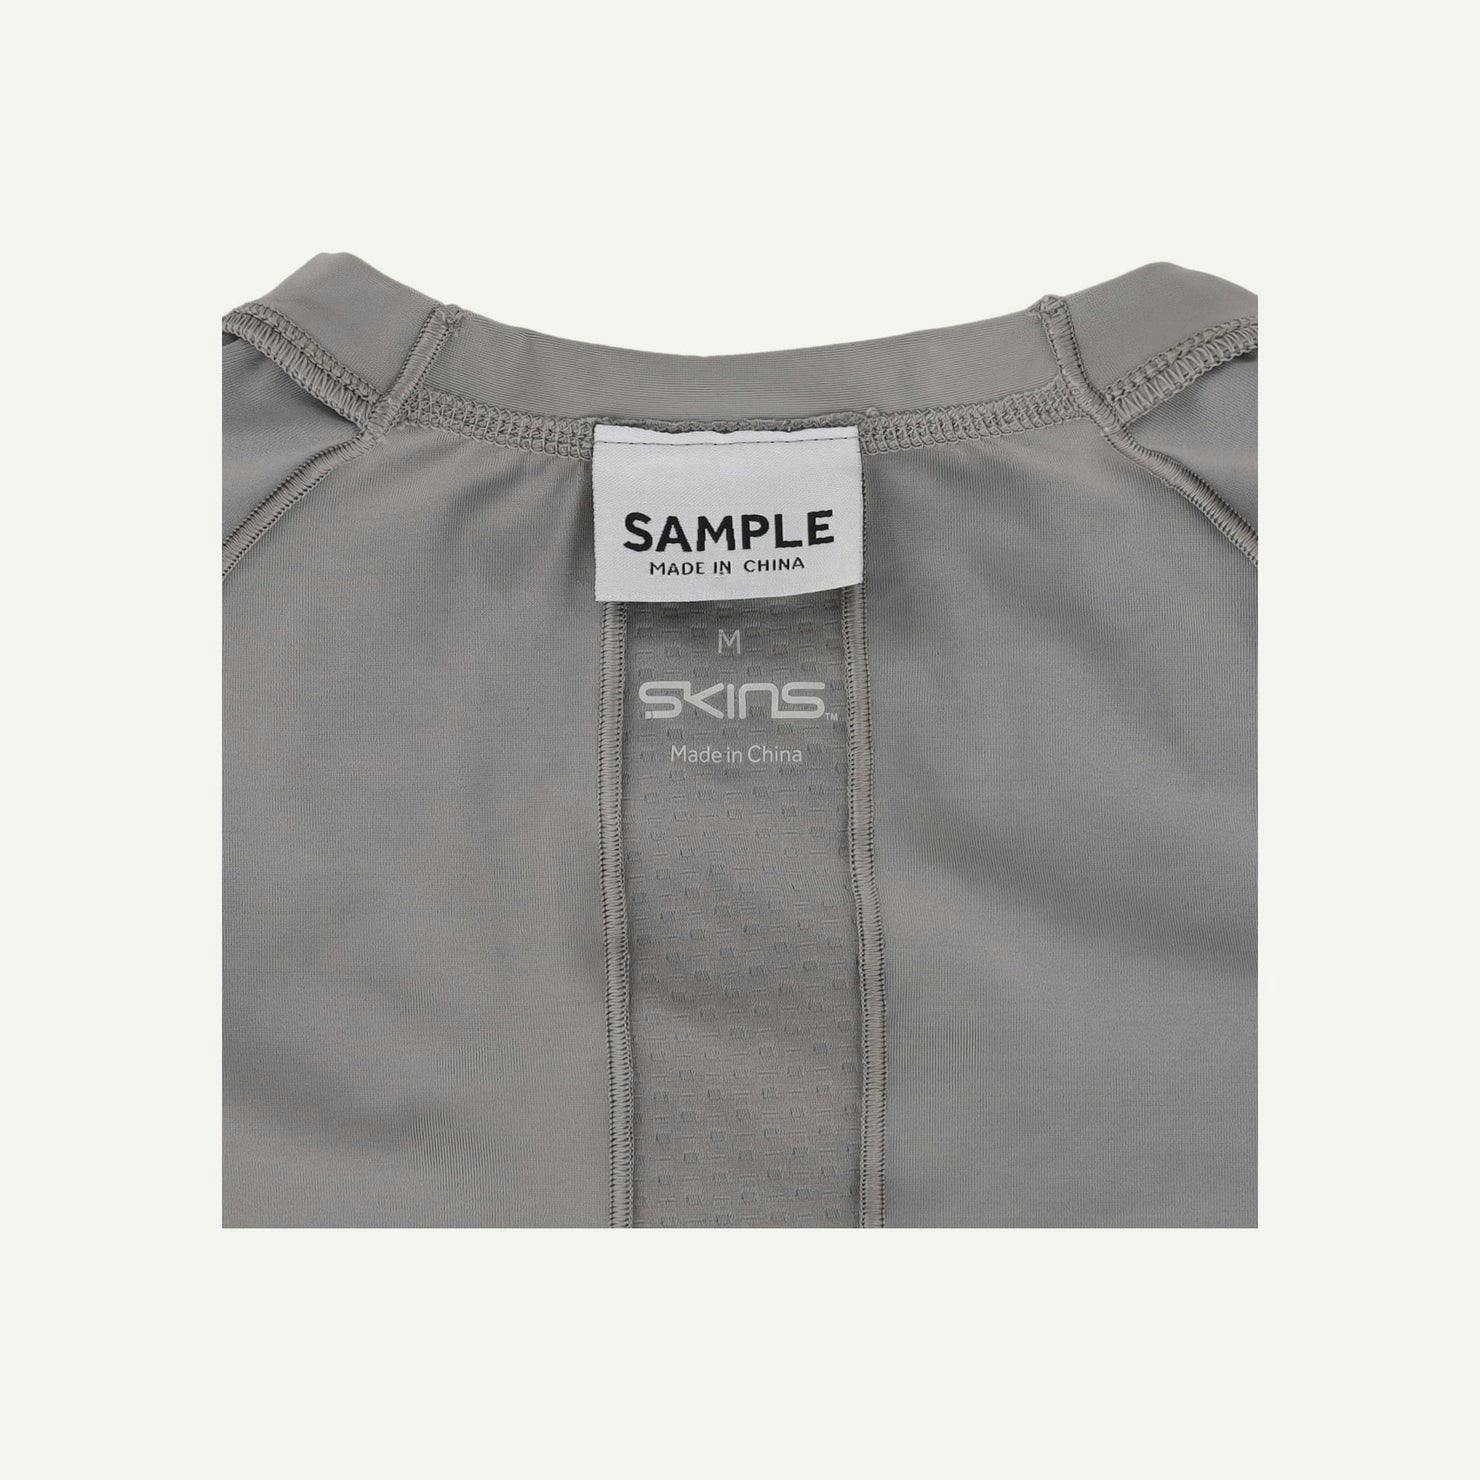 SKINS Compression As new Grey Series 5 Top